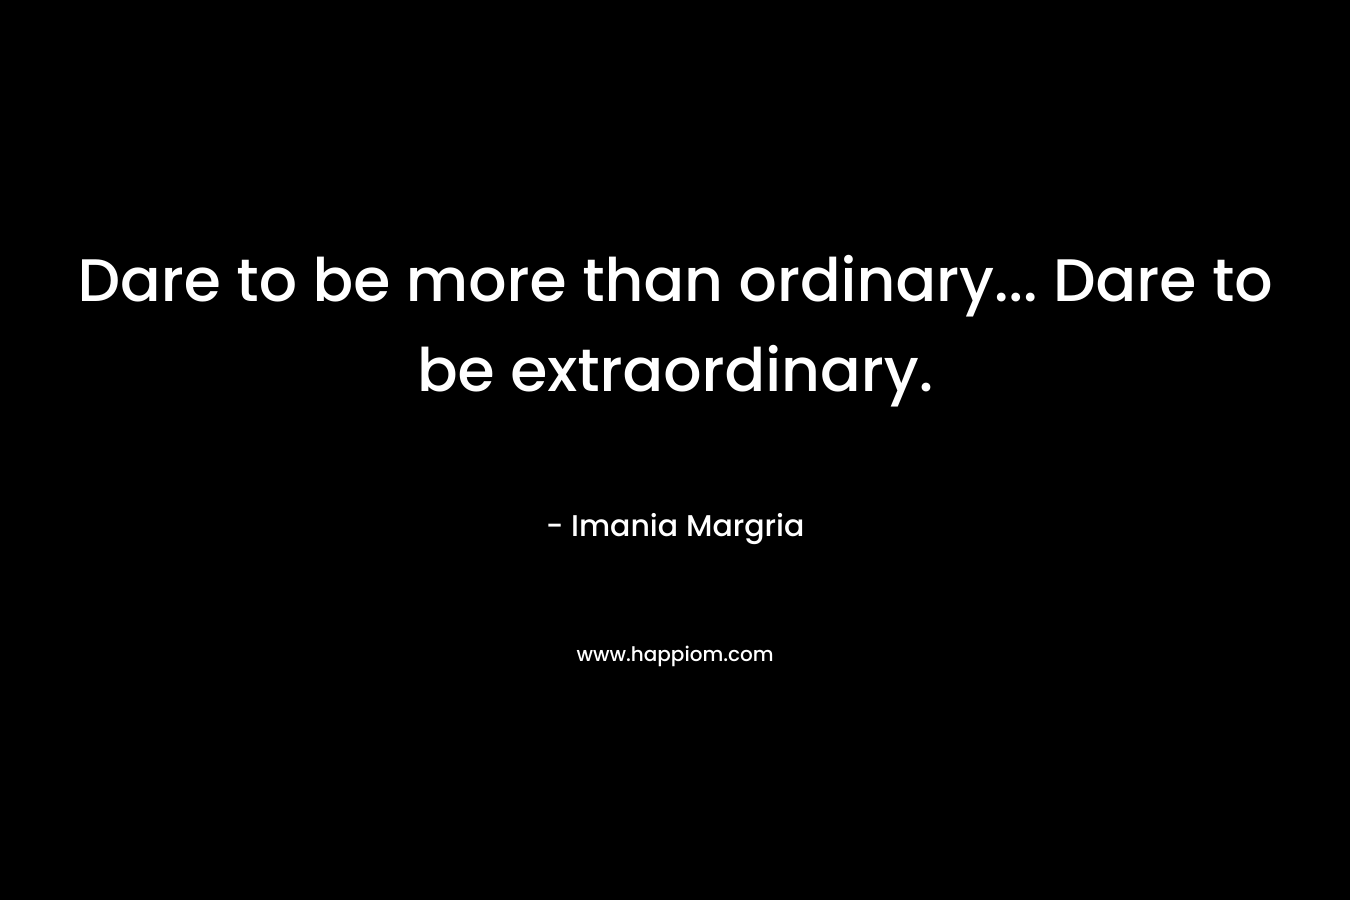 Dare to be more than ordinary... Dare to be extraordinary.